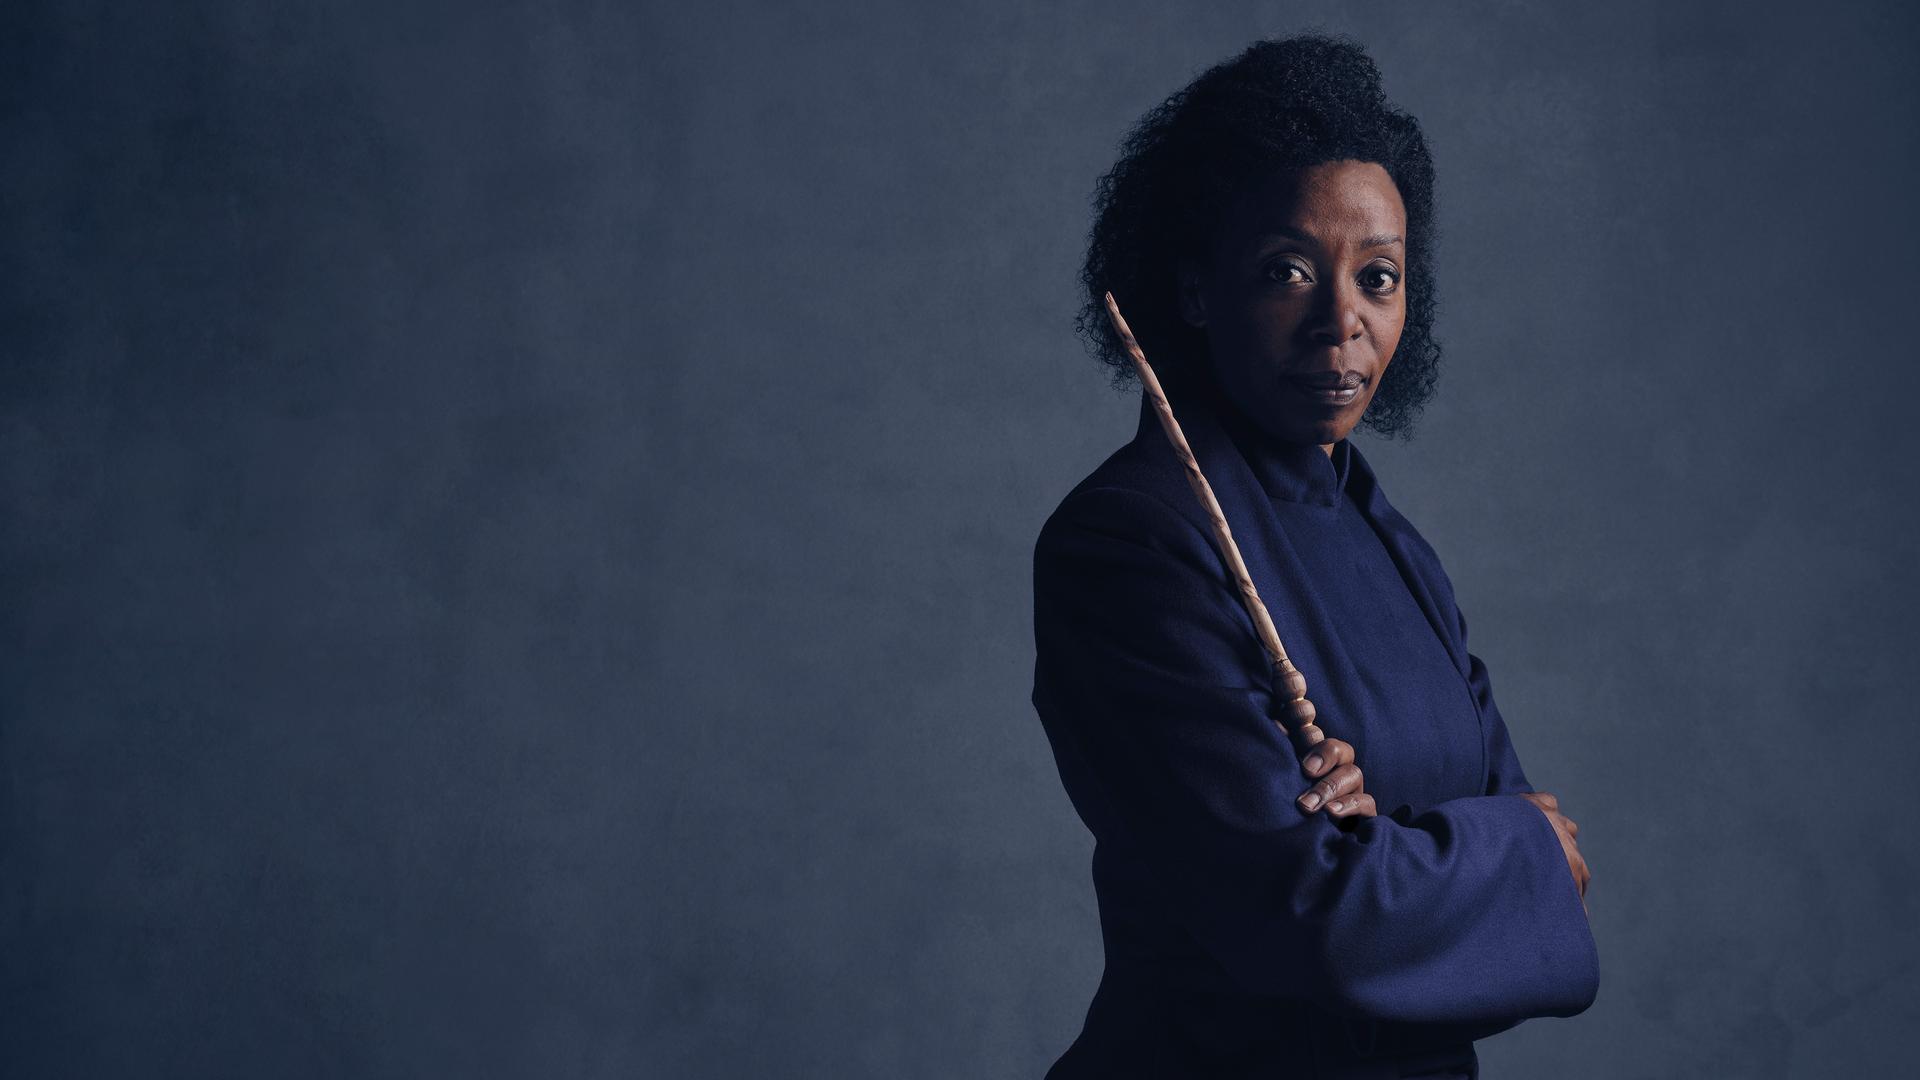 Hermione Granger, played by Noma Dumezweni in the new play Harry Potter And The Cursed Child.